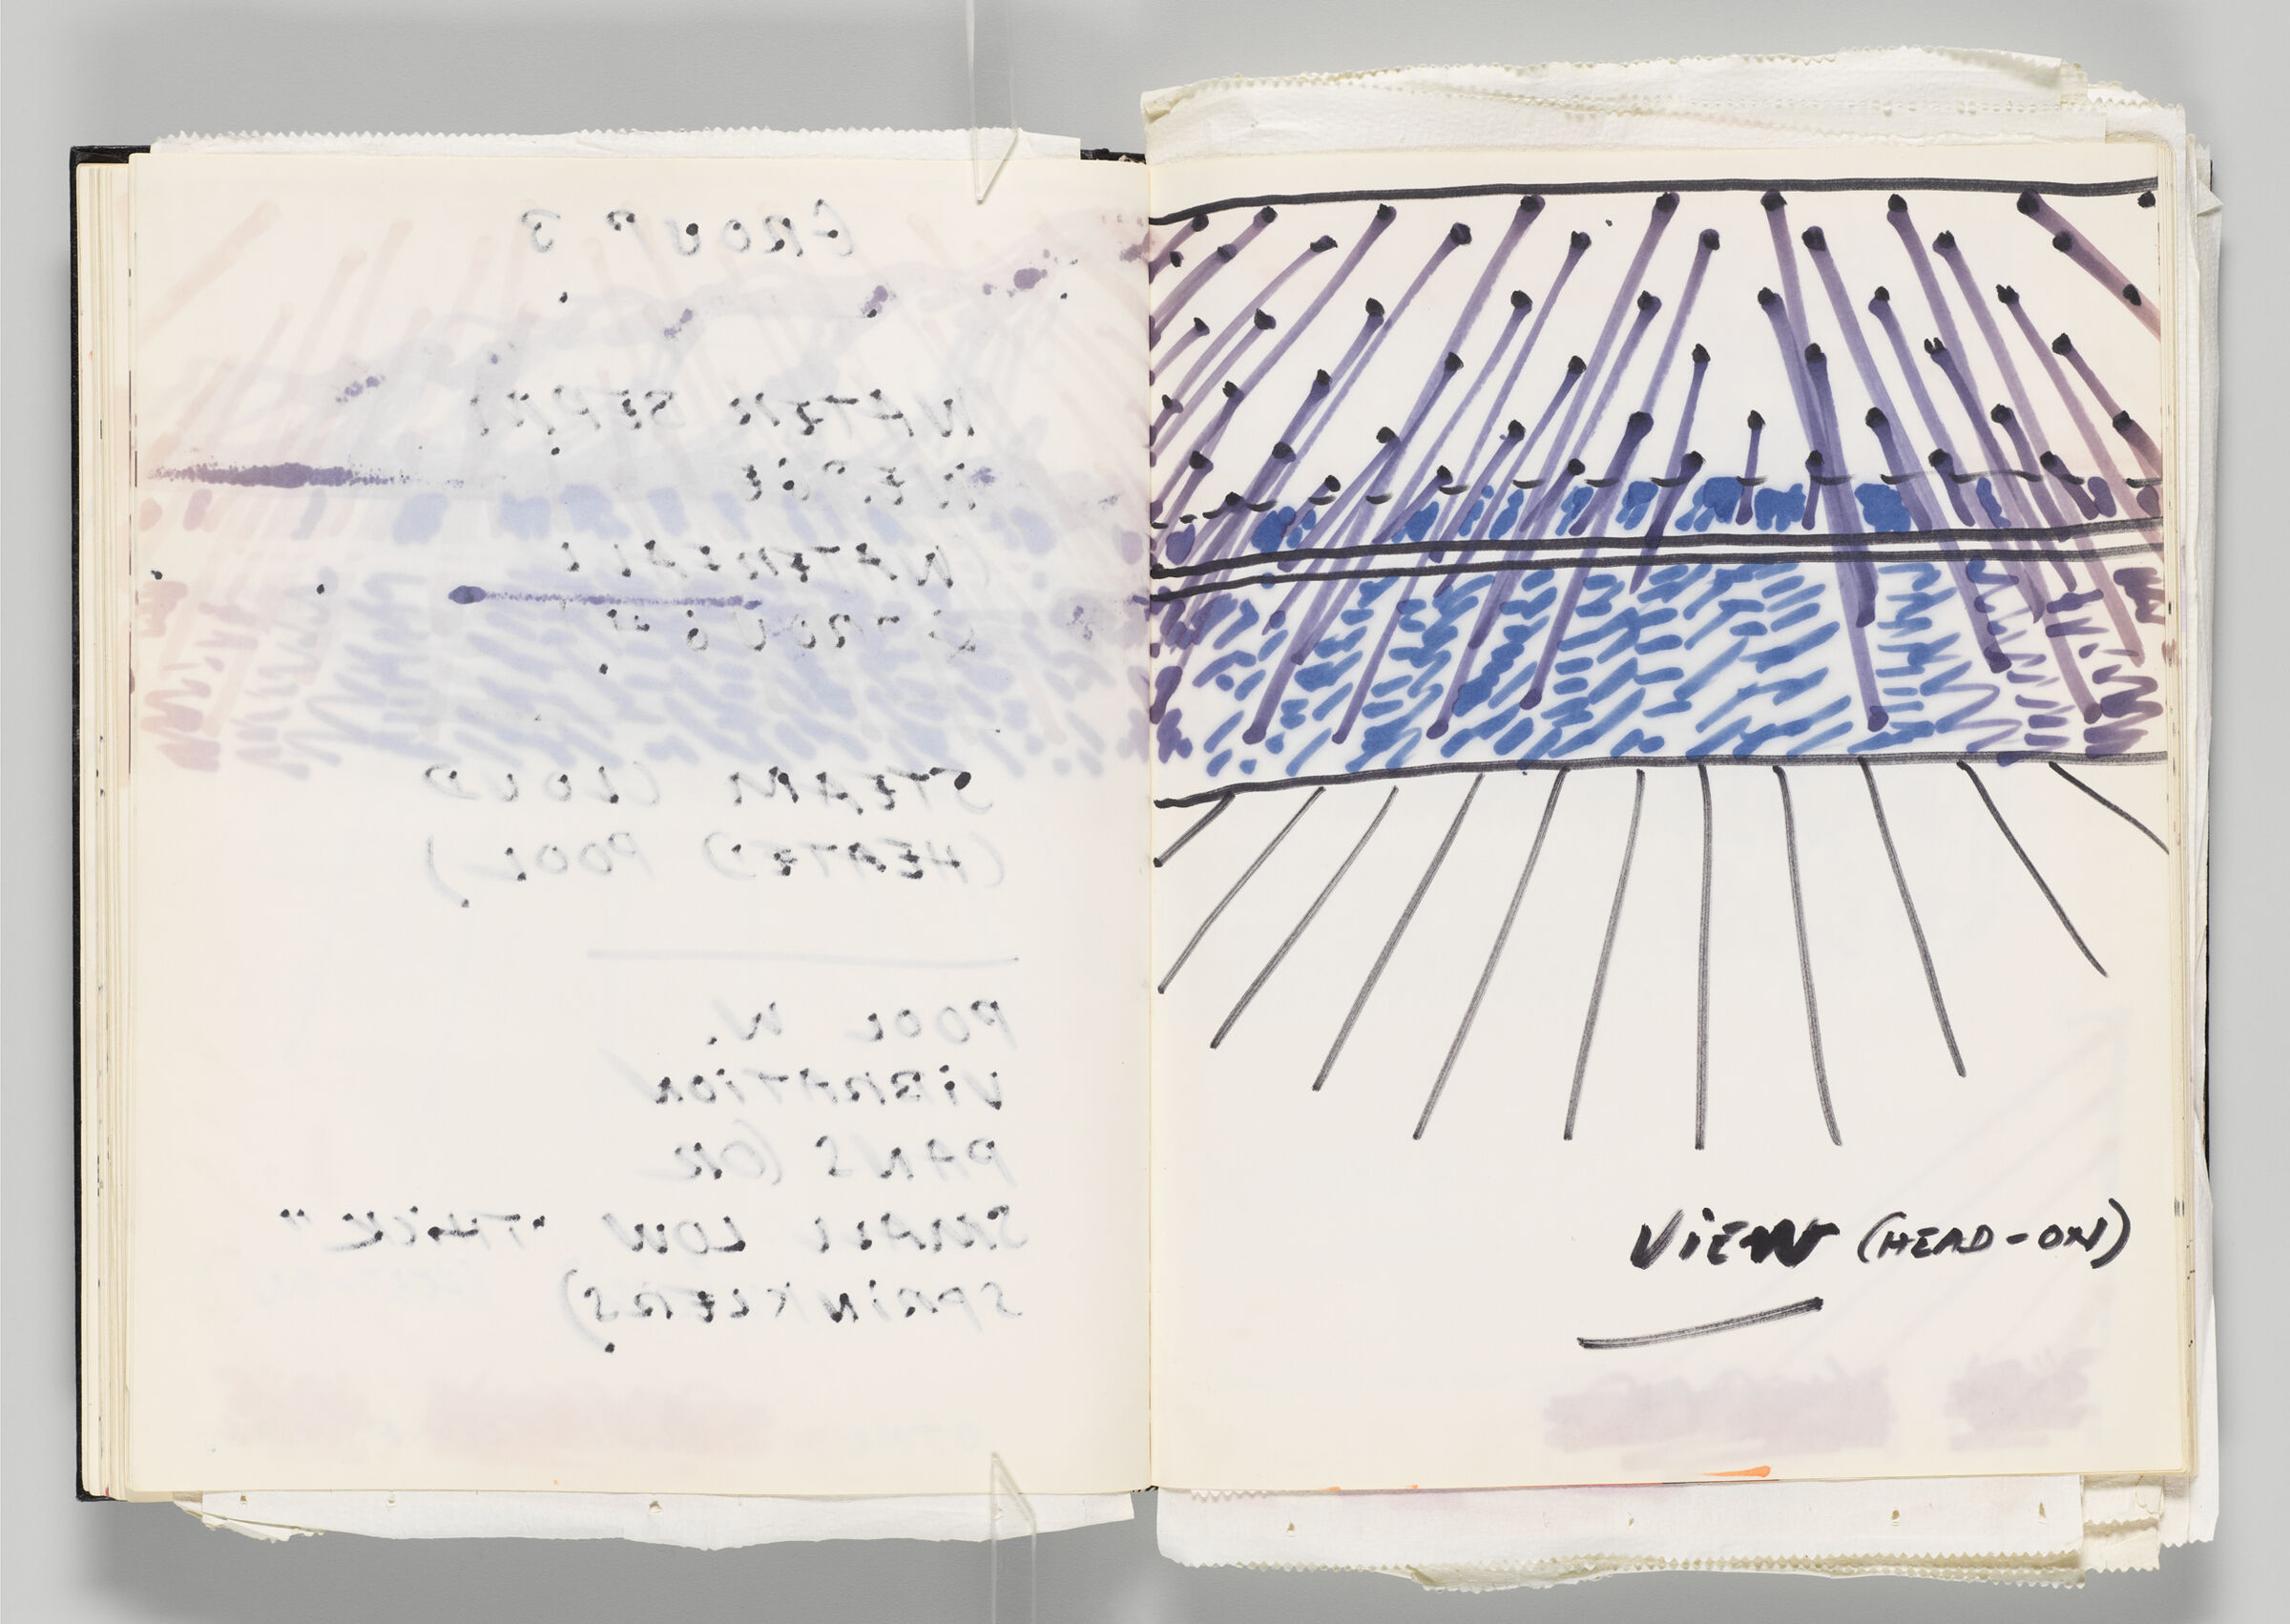 Untitled (Bleed-Through Of Previous Page And Color Transfer, Left Page); Untitled (Design And Color Transfer, Right Page)